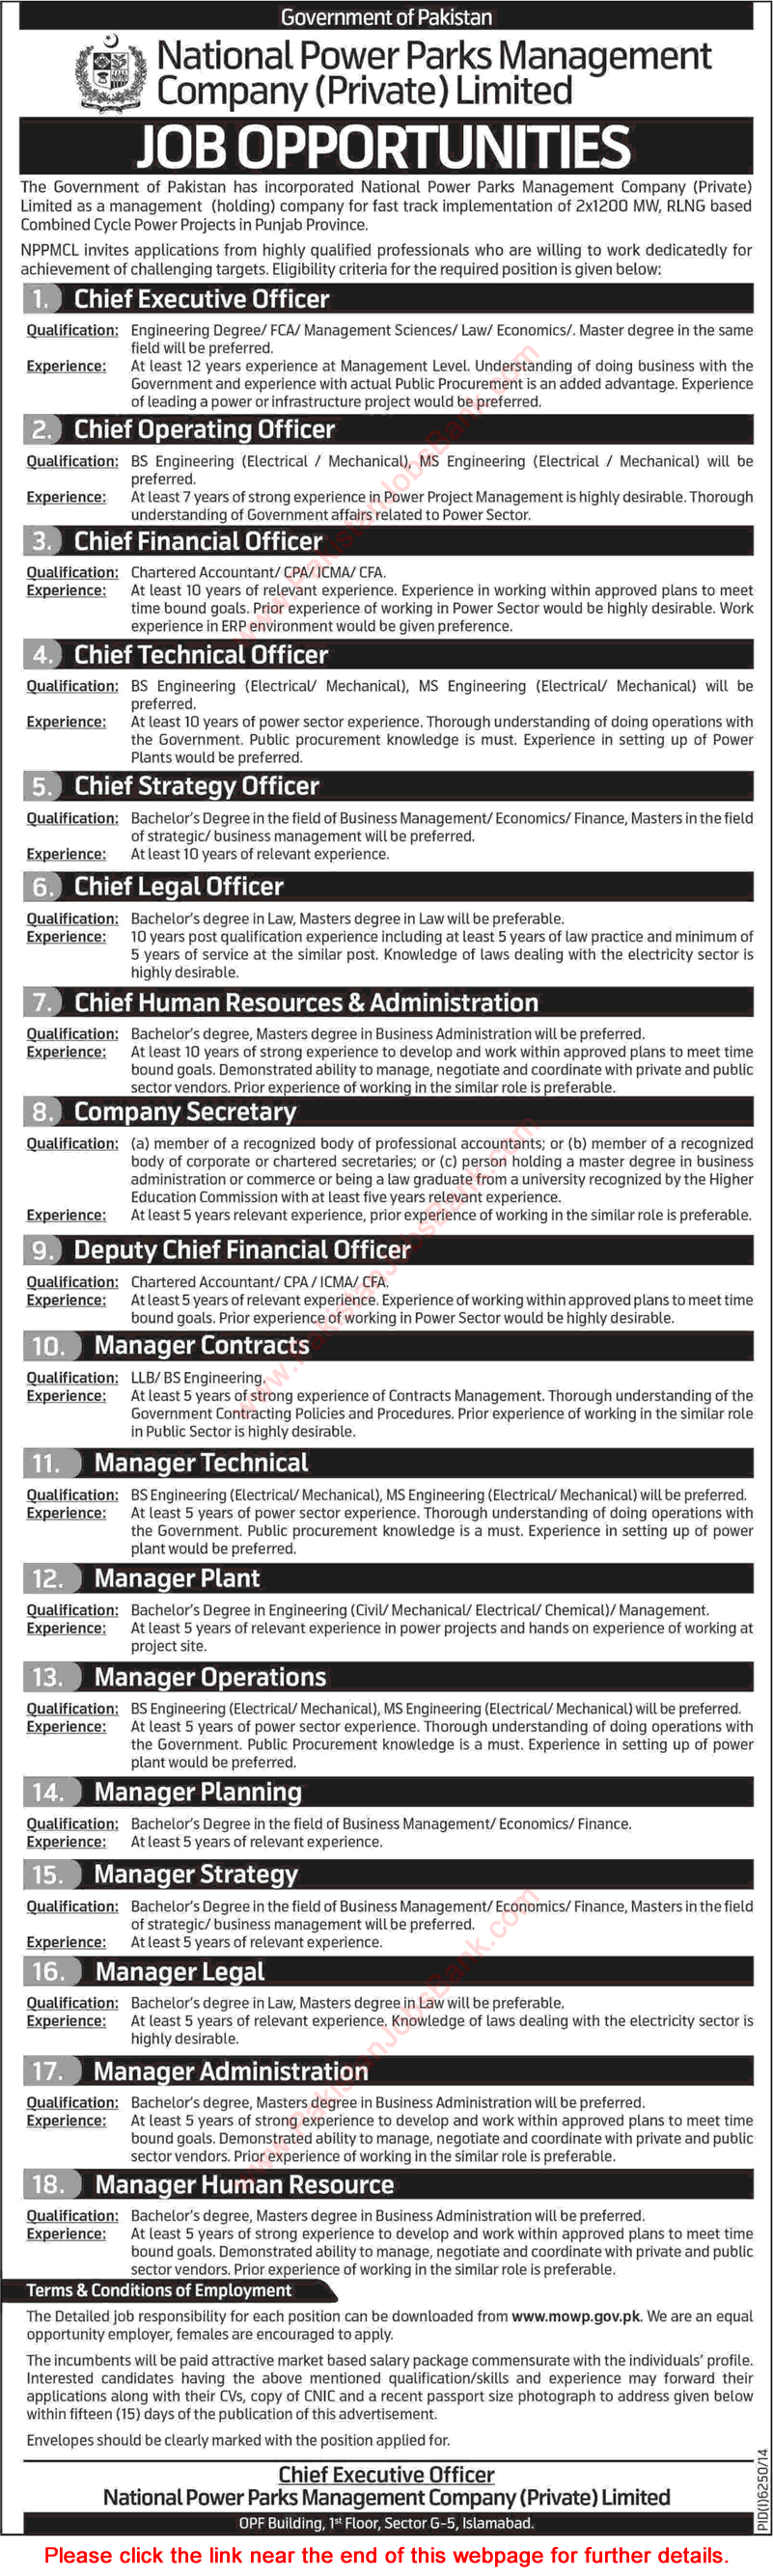 Job Opportunities in National Power Parks Management Company Limited 2015 May NPPMCL Latest